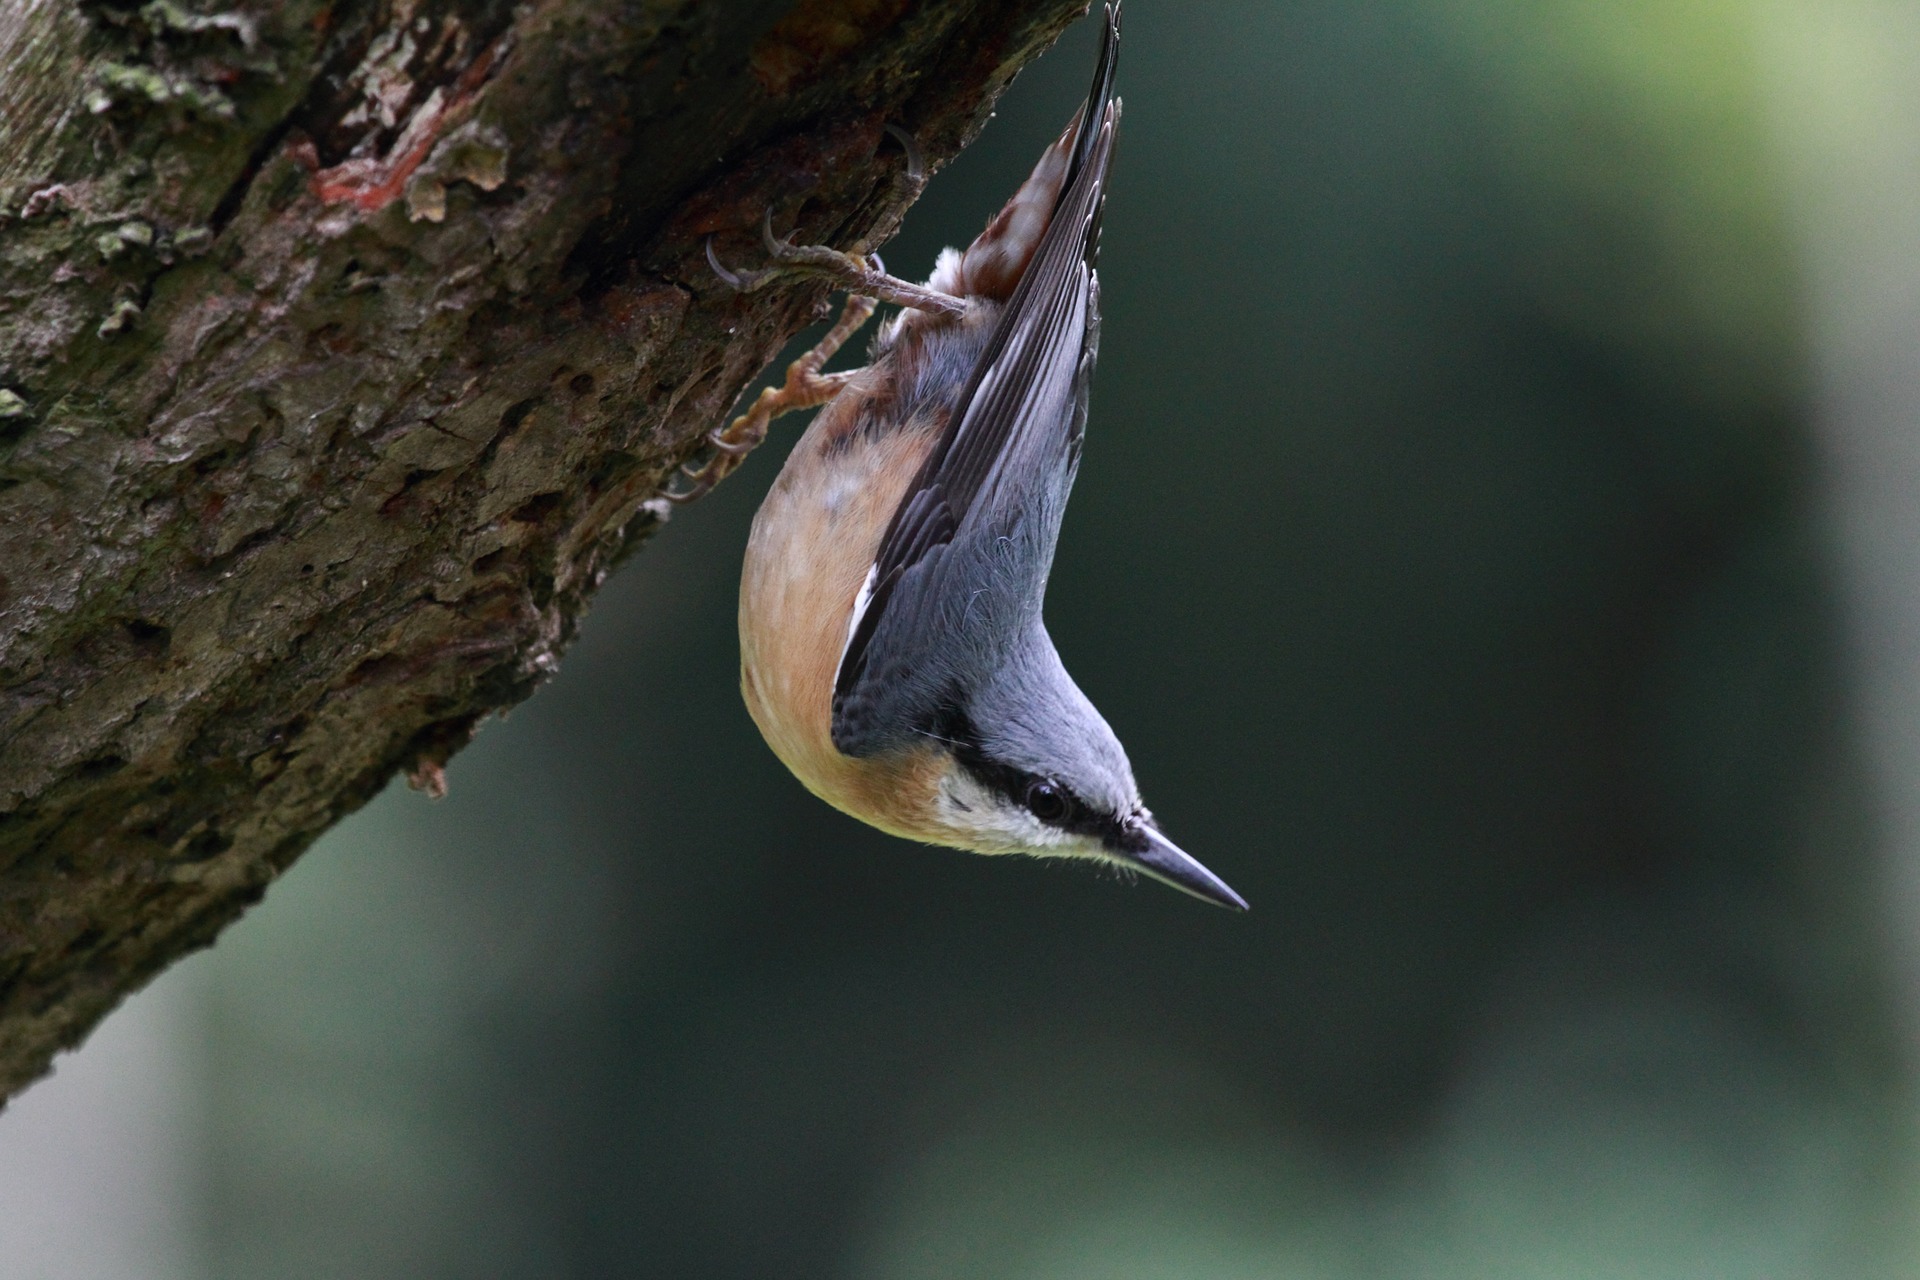 A Nuthatch...seeing things "reversely"? (Pixabay)